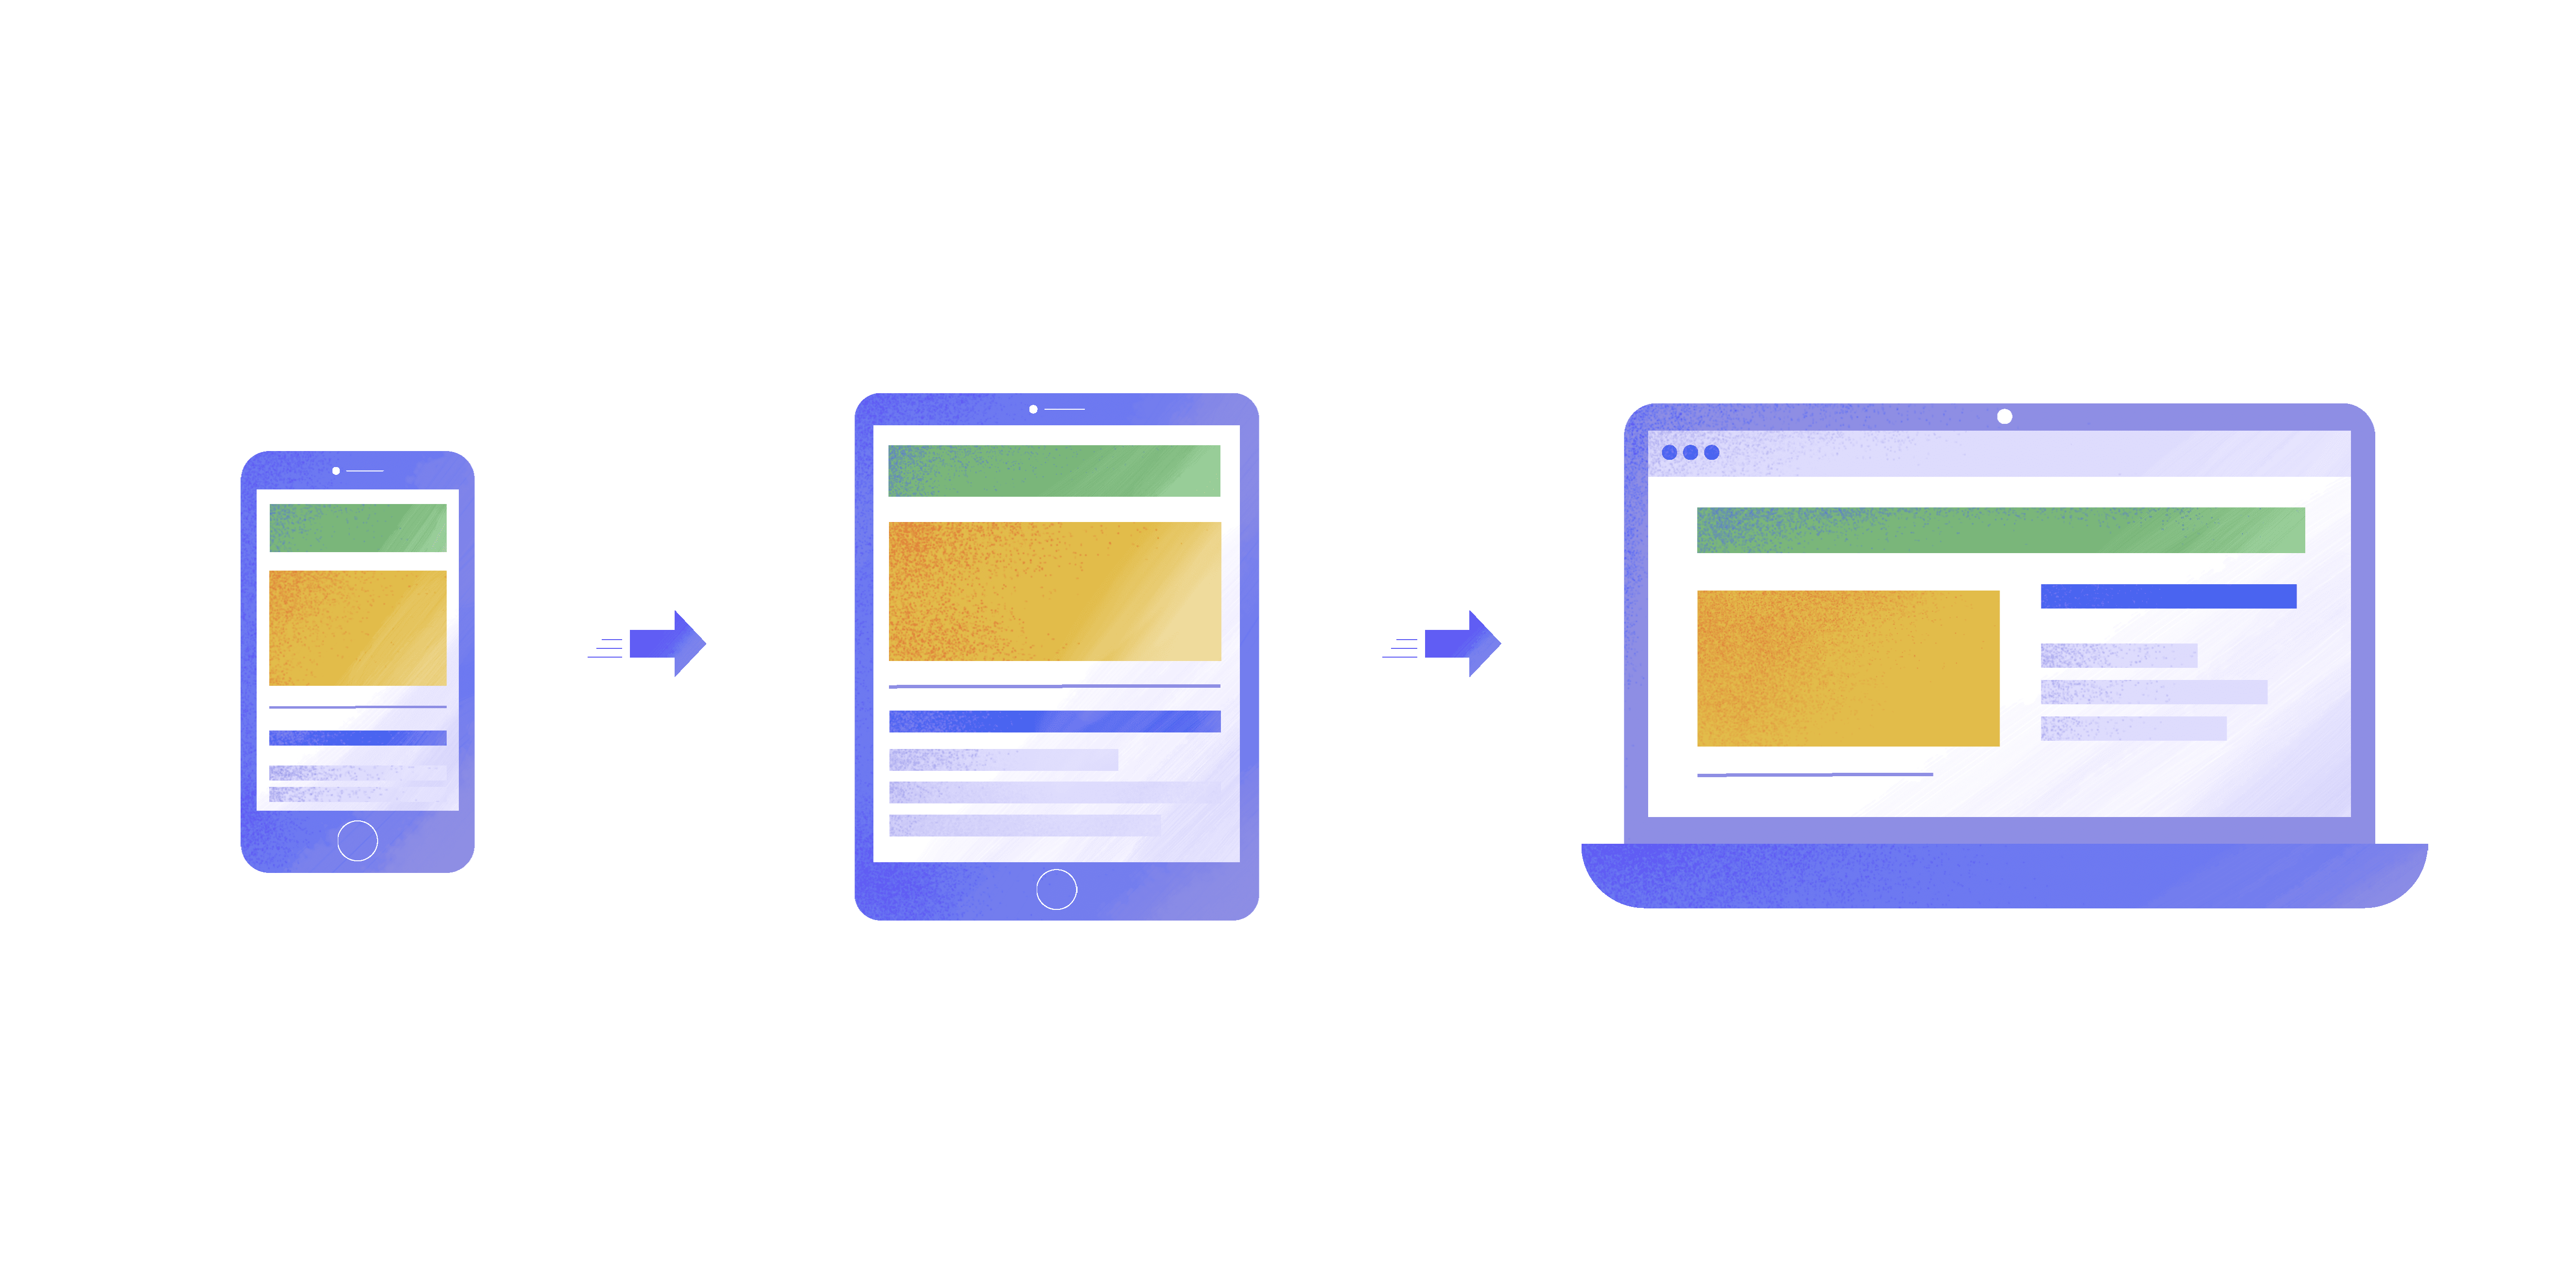 web content should adapt to the different screen sizes